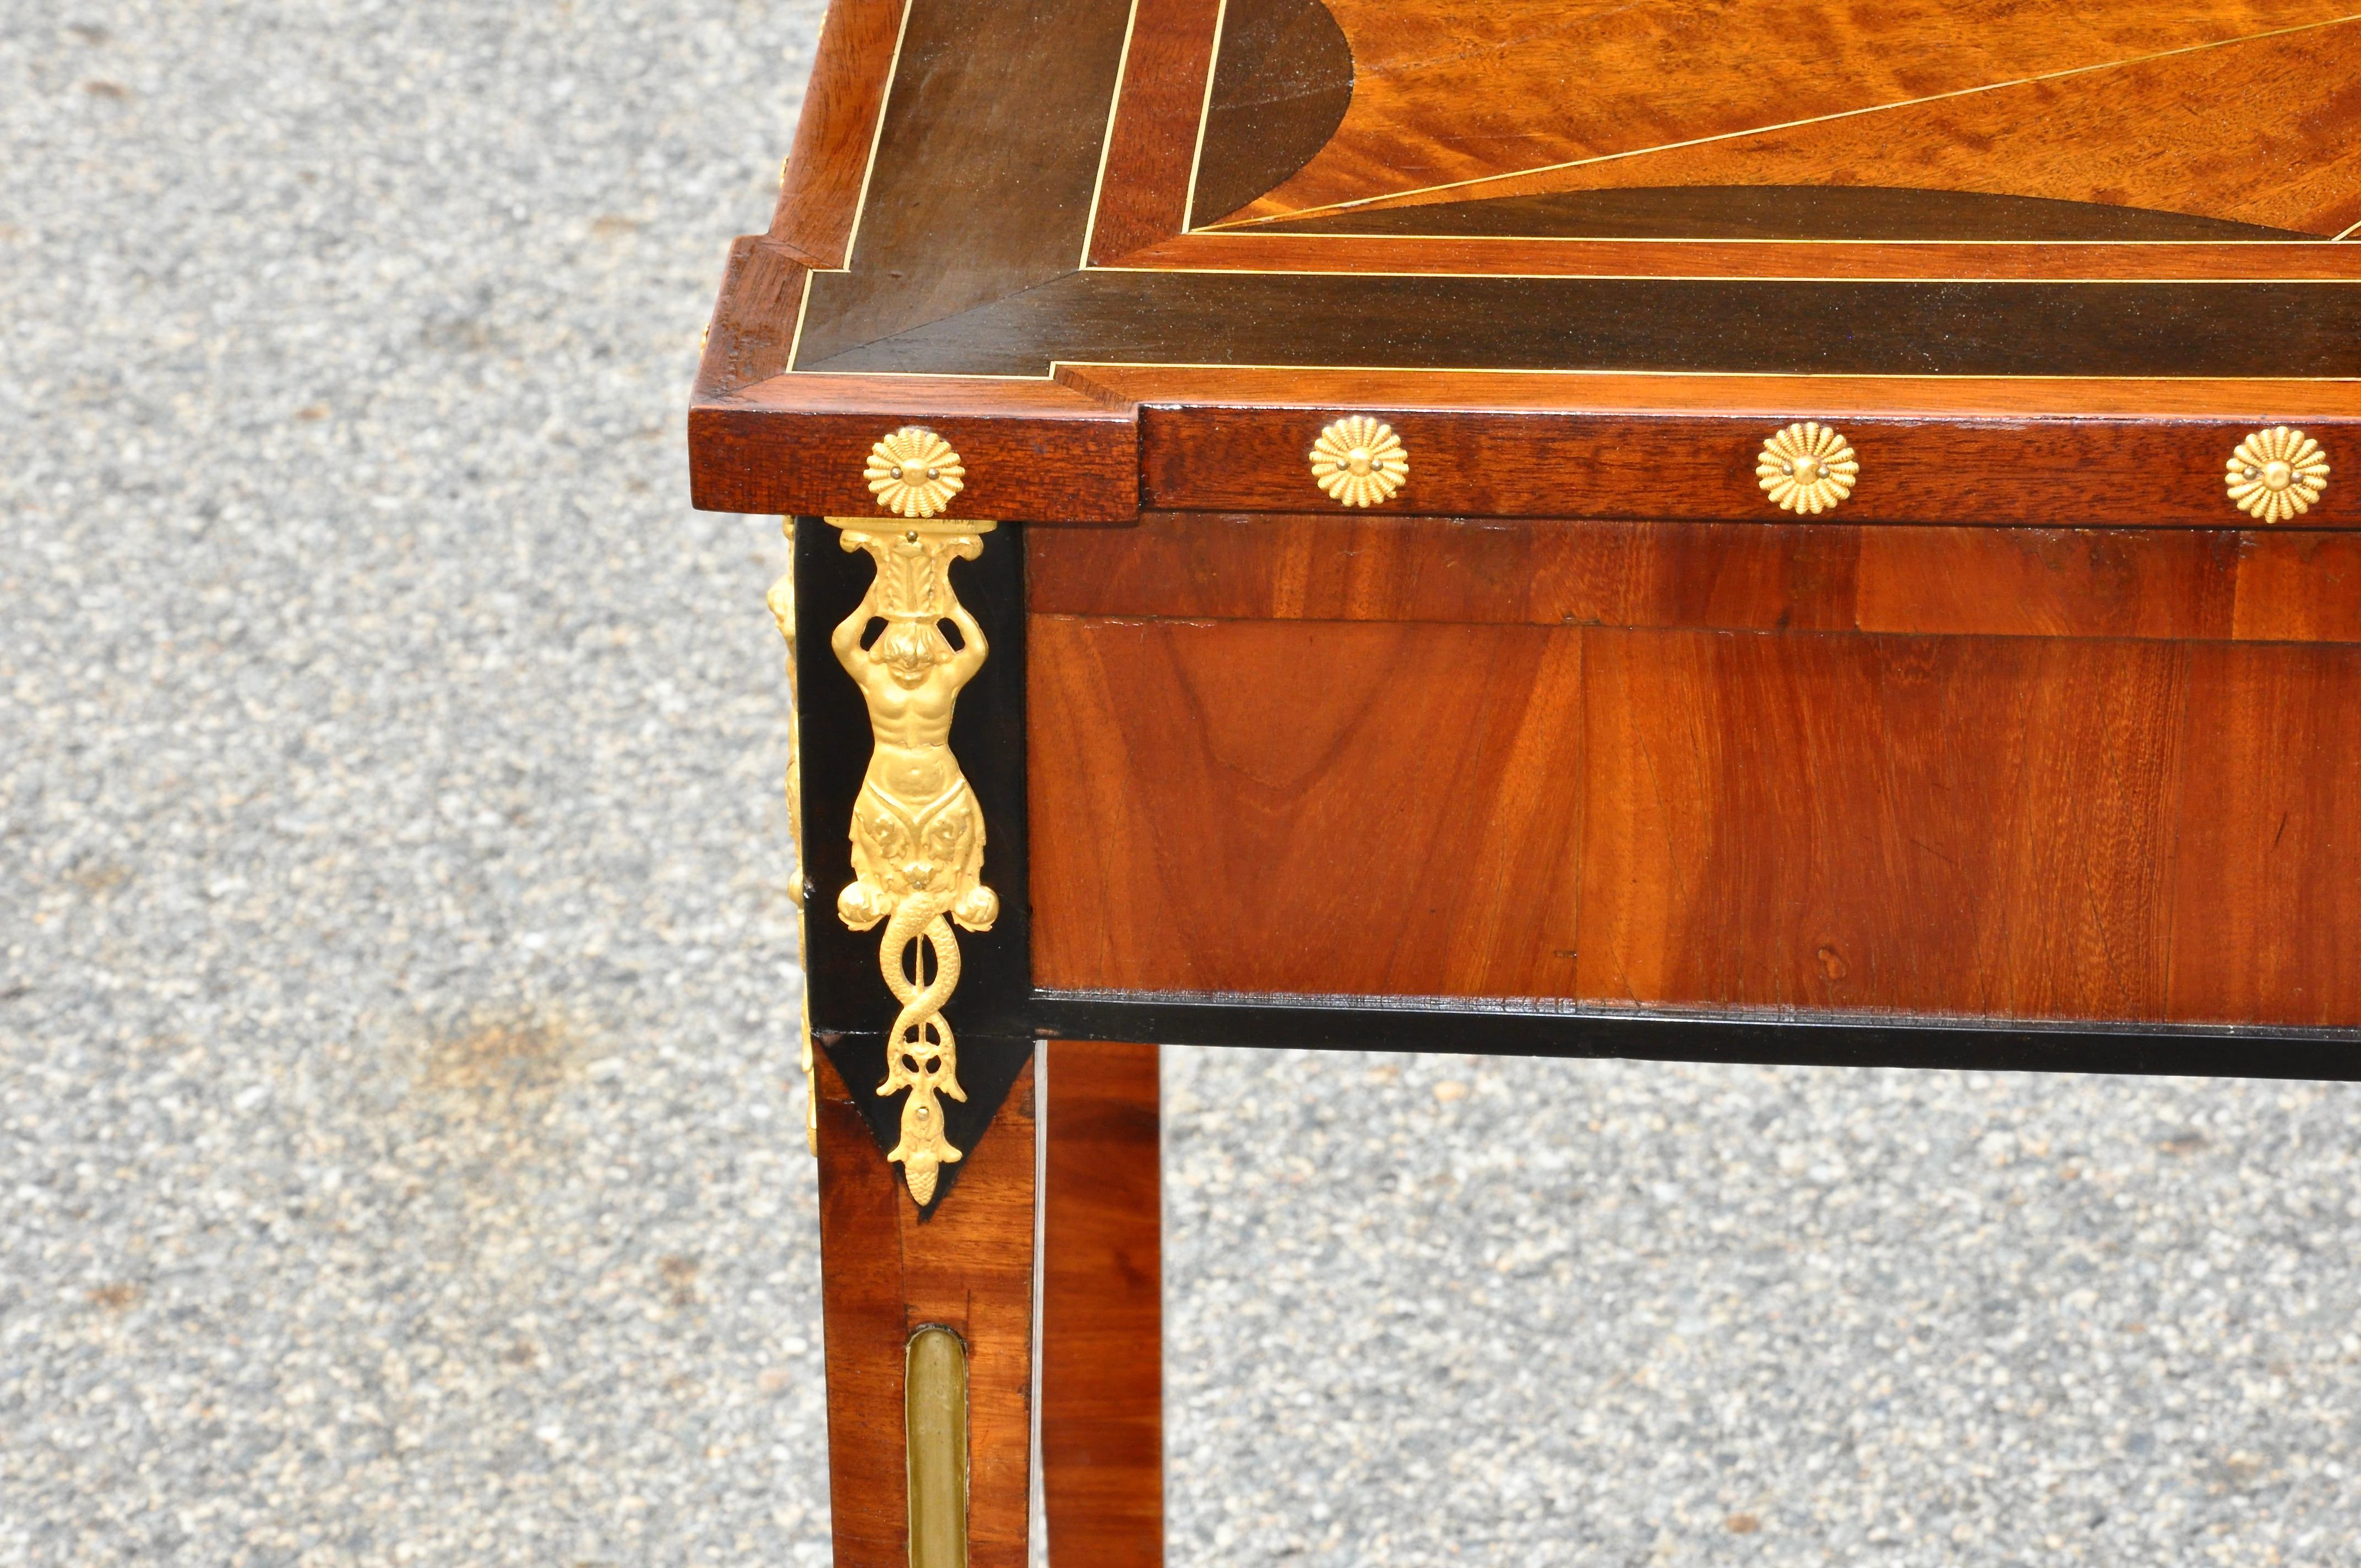 Early 19th Century Russian Neoclassical Table by Heinrich Gambs In Good Condition For Sale In Essex, MA